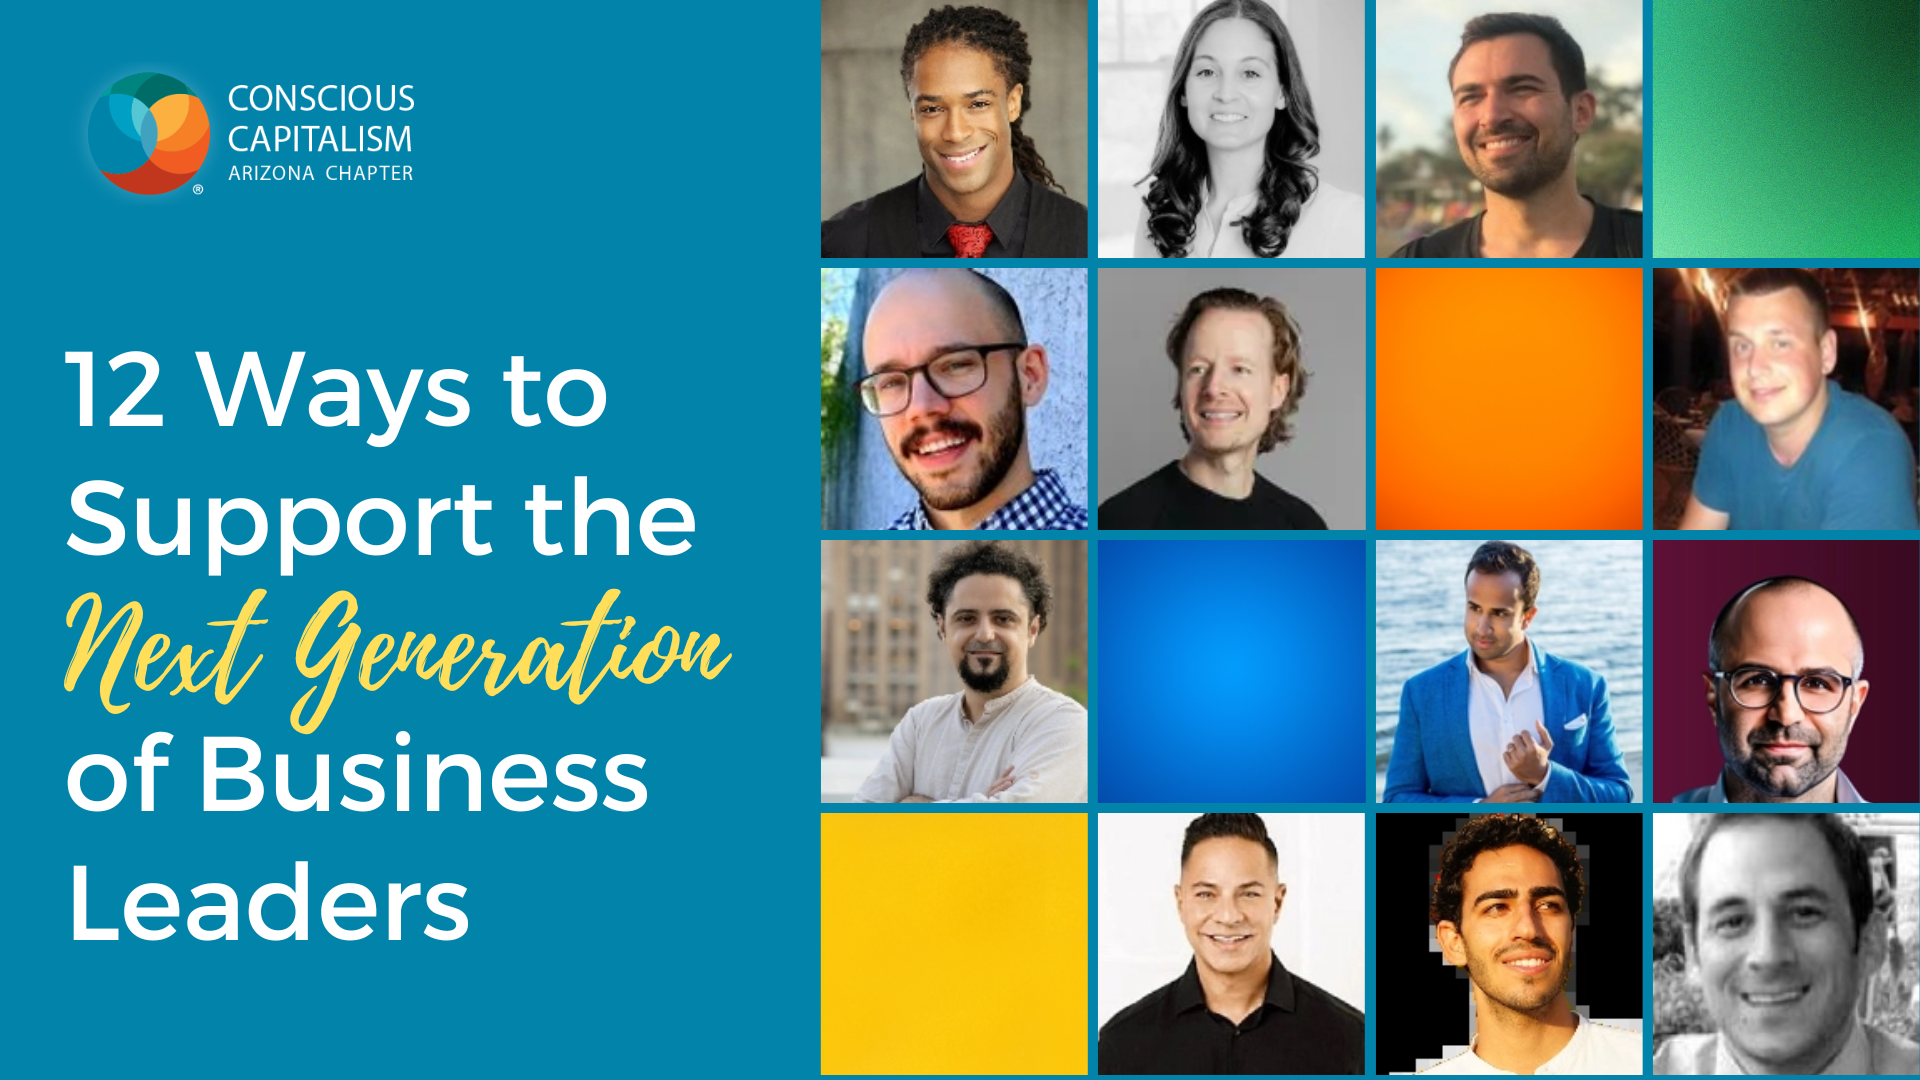 12 Ways to Support the Next Generation of Business Leaders